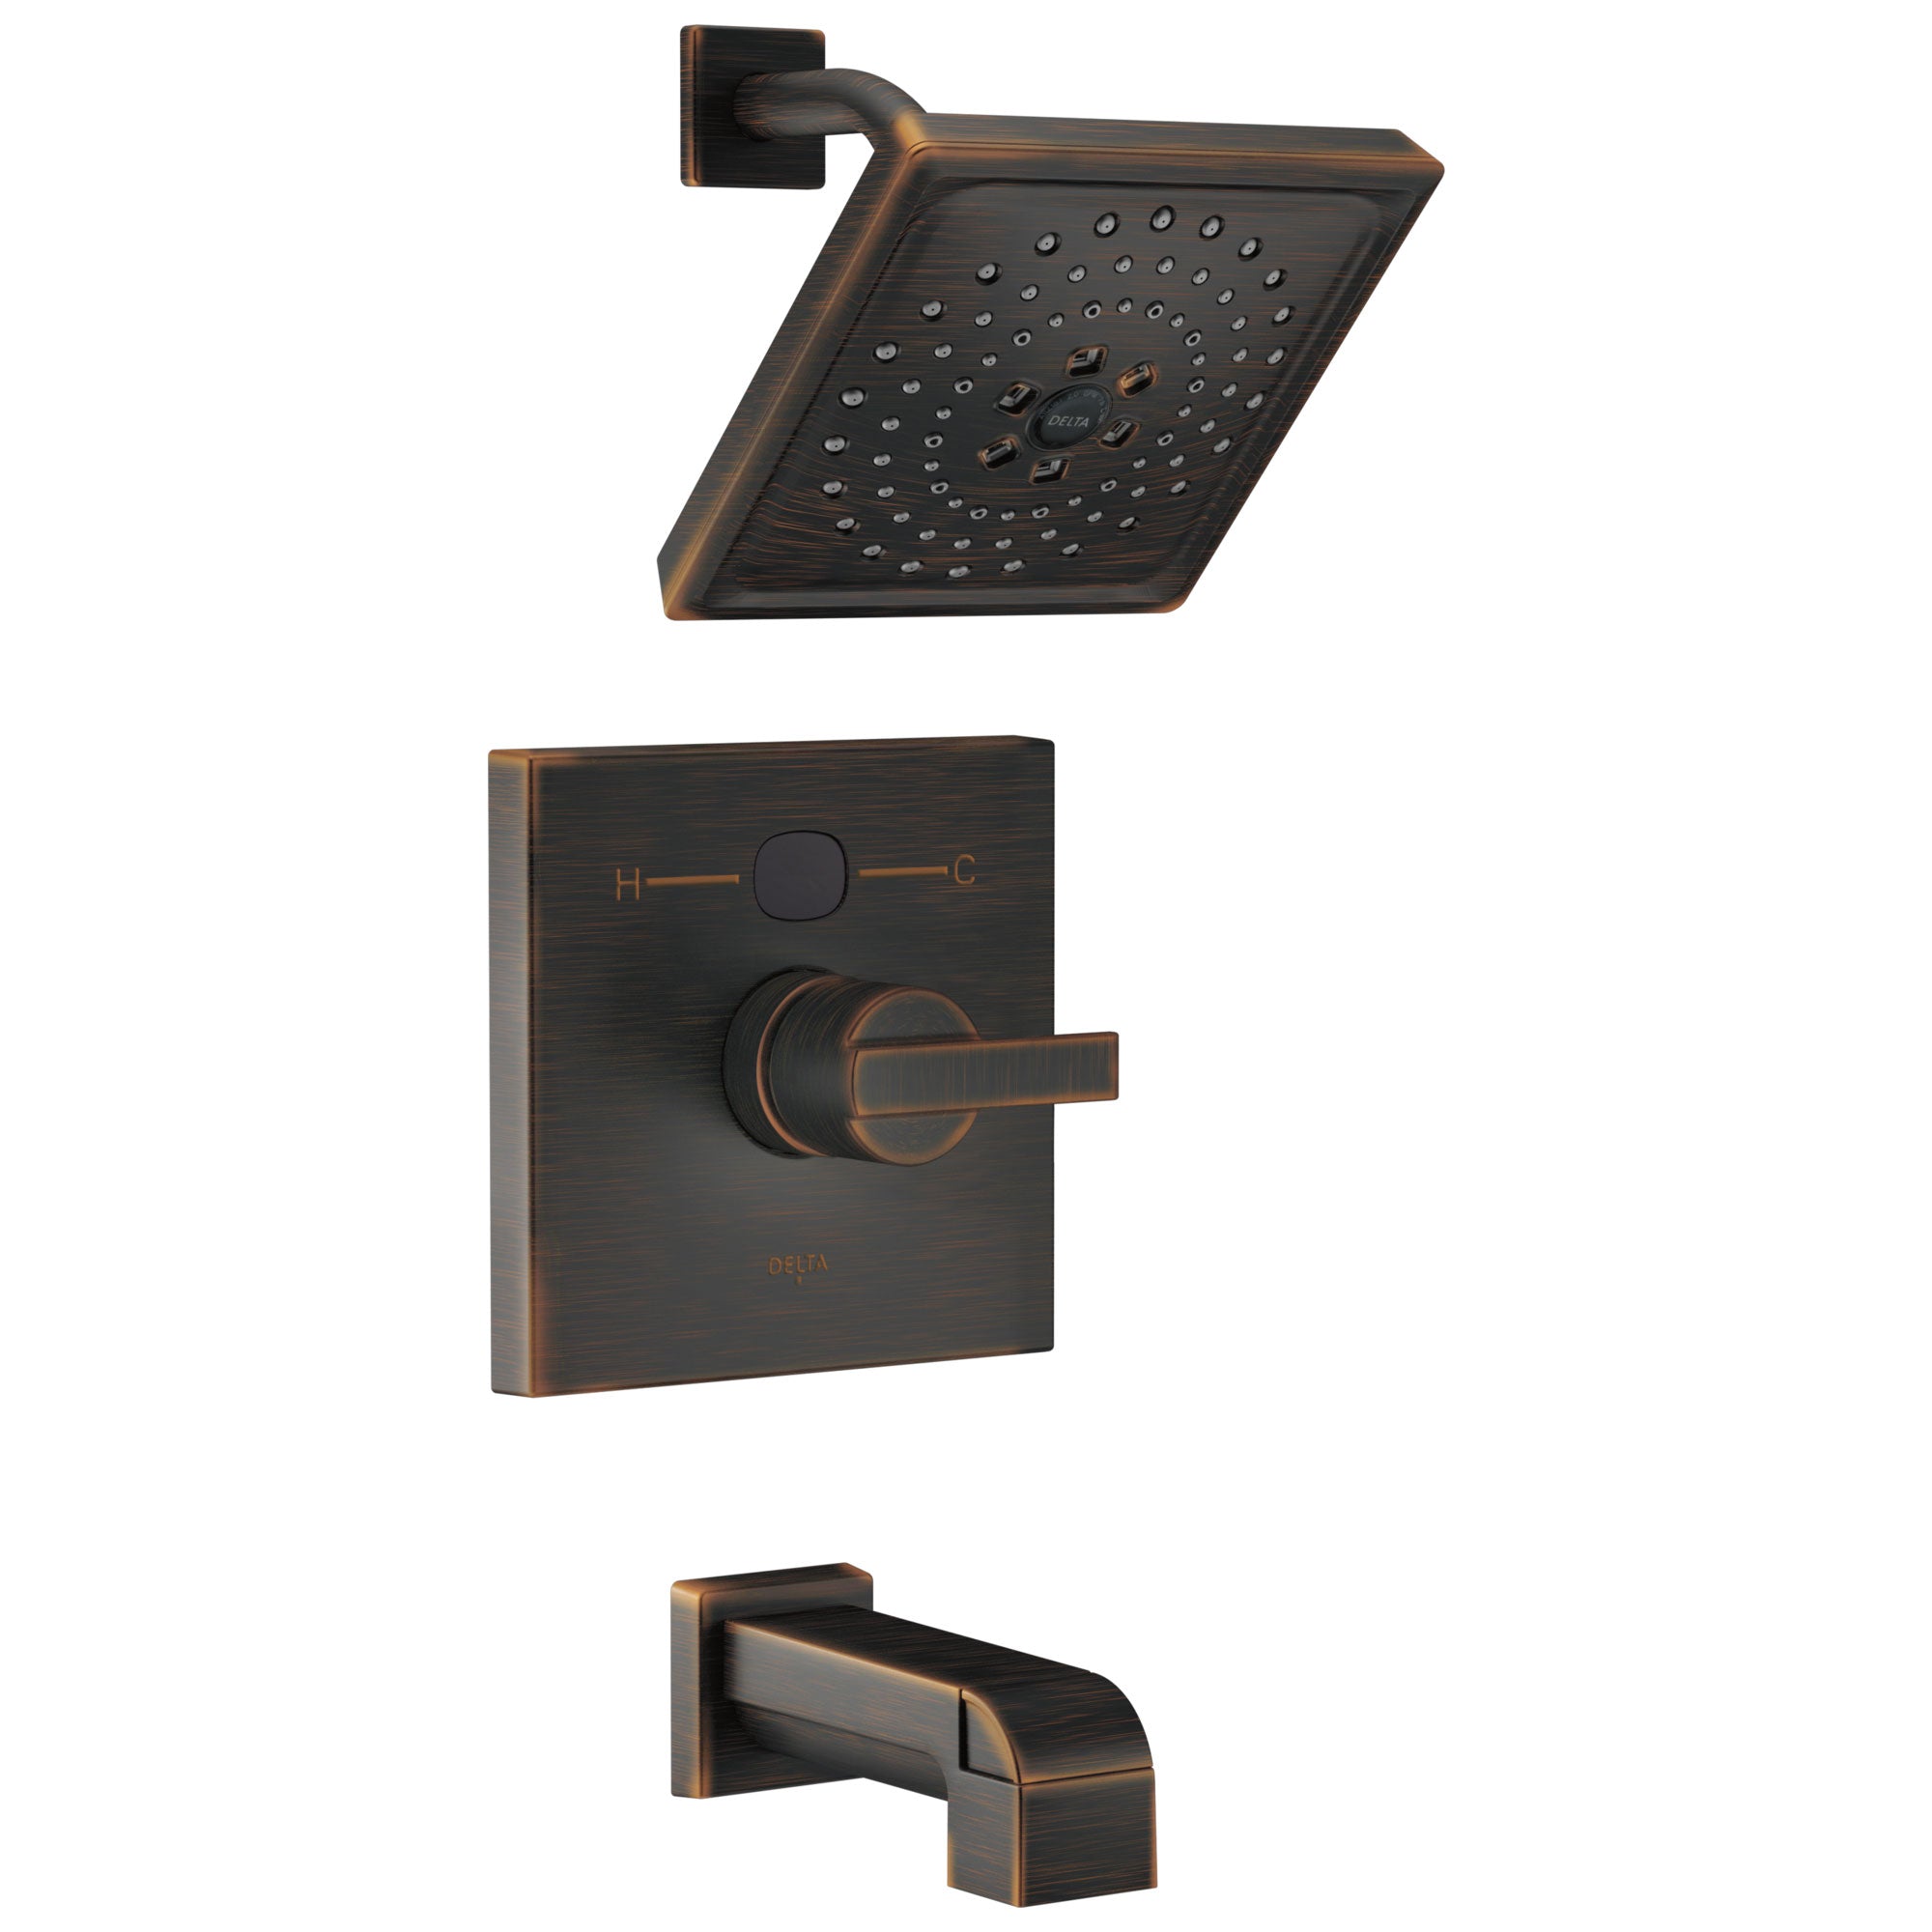 Delta Venetian Bronze Angular Modern 14 Series Digital Display Temp2O One Handle Tub and Shower Combination Faucet Trim (Valve Sold Separately) 667570